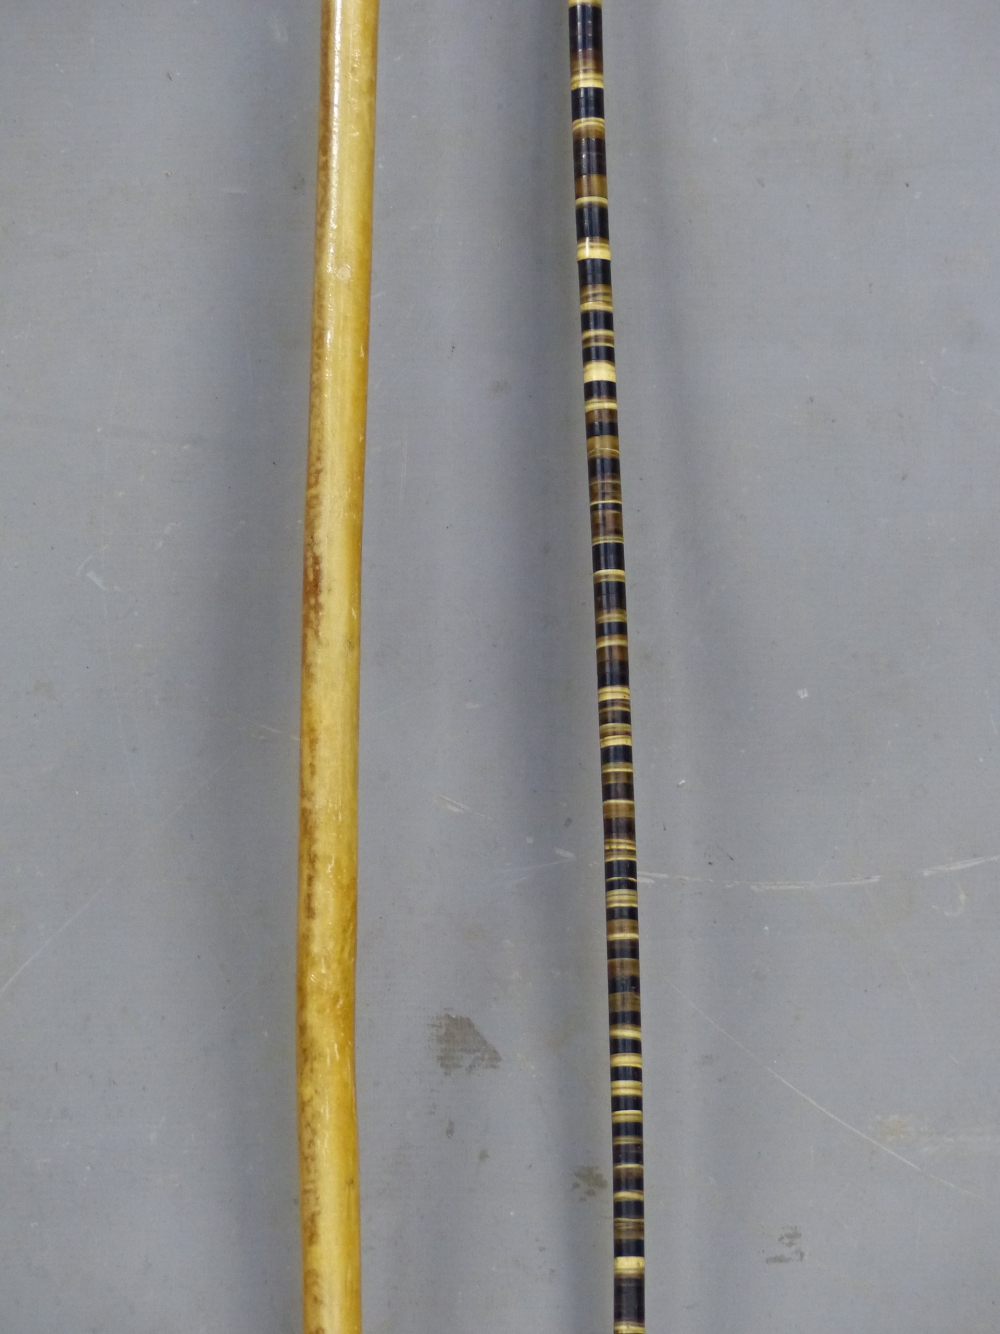 A HORN WALKING STICK OF AMBER HUE TOGETHER WITH A WALKING CANE FORMED OF HORN IN BANDS OF COLOURS - Image 3 of 9